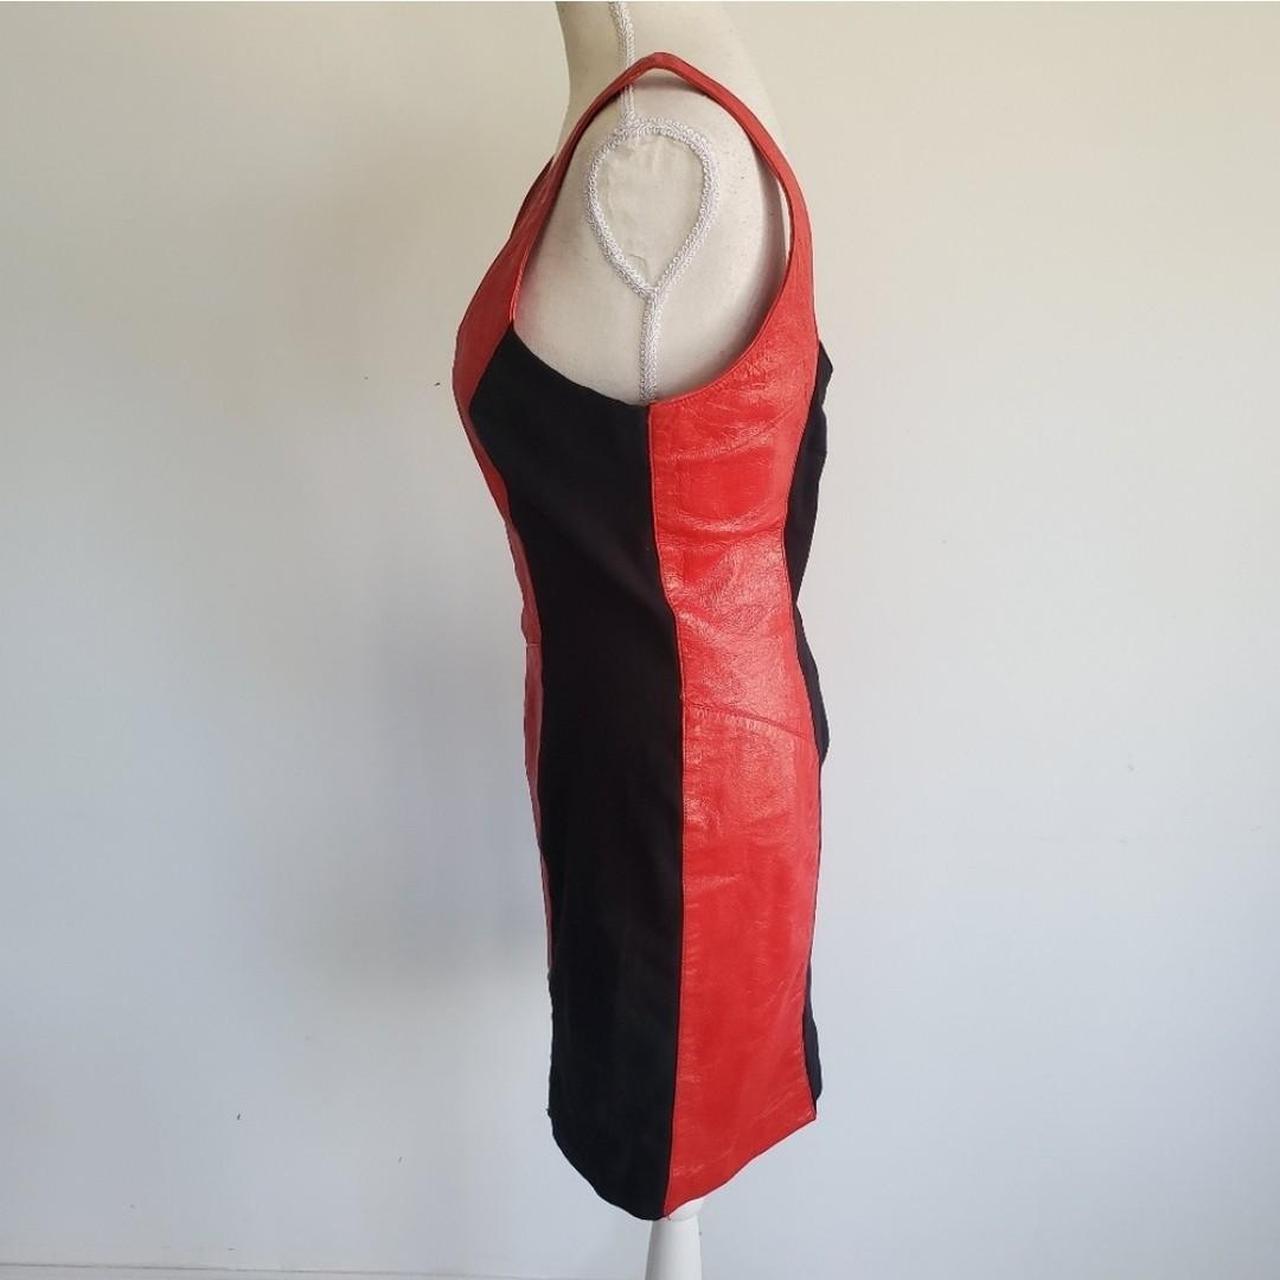 Wilson’s Leather Women's Black and Red Dress (2)